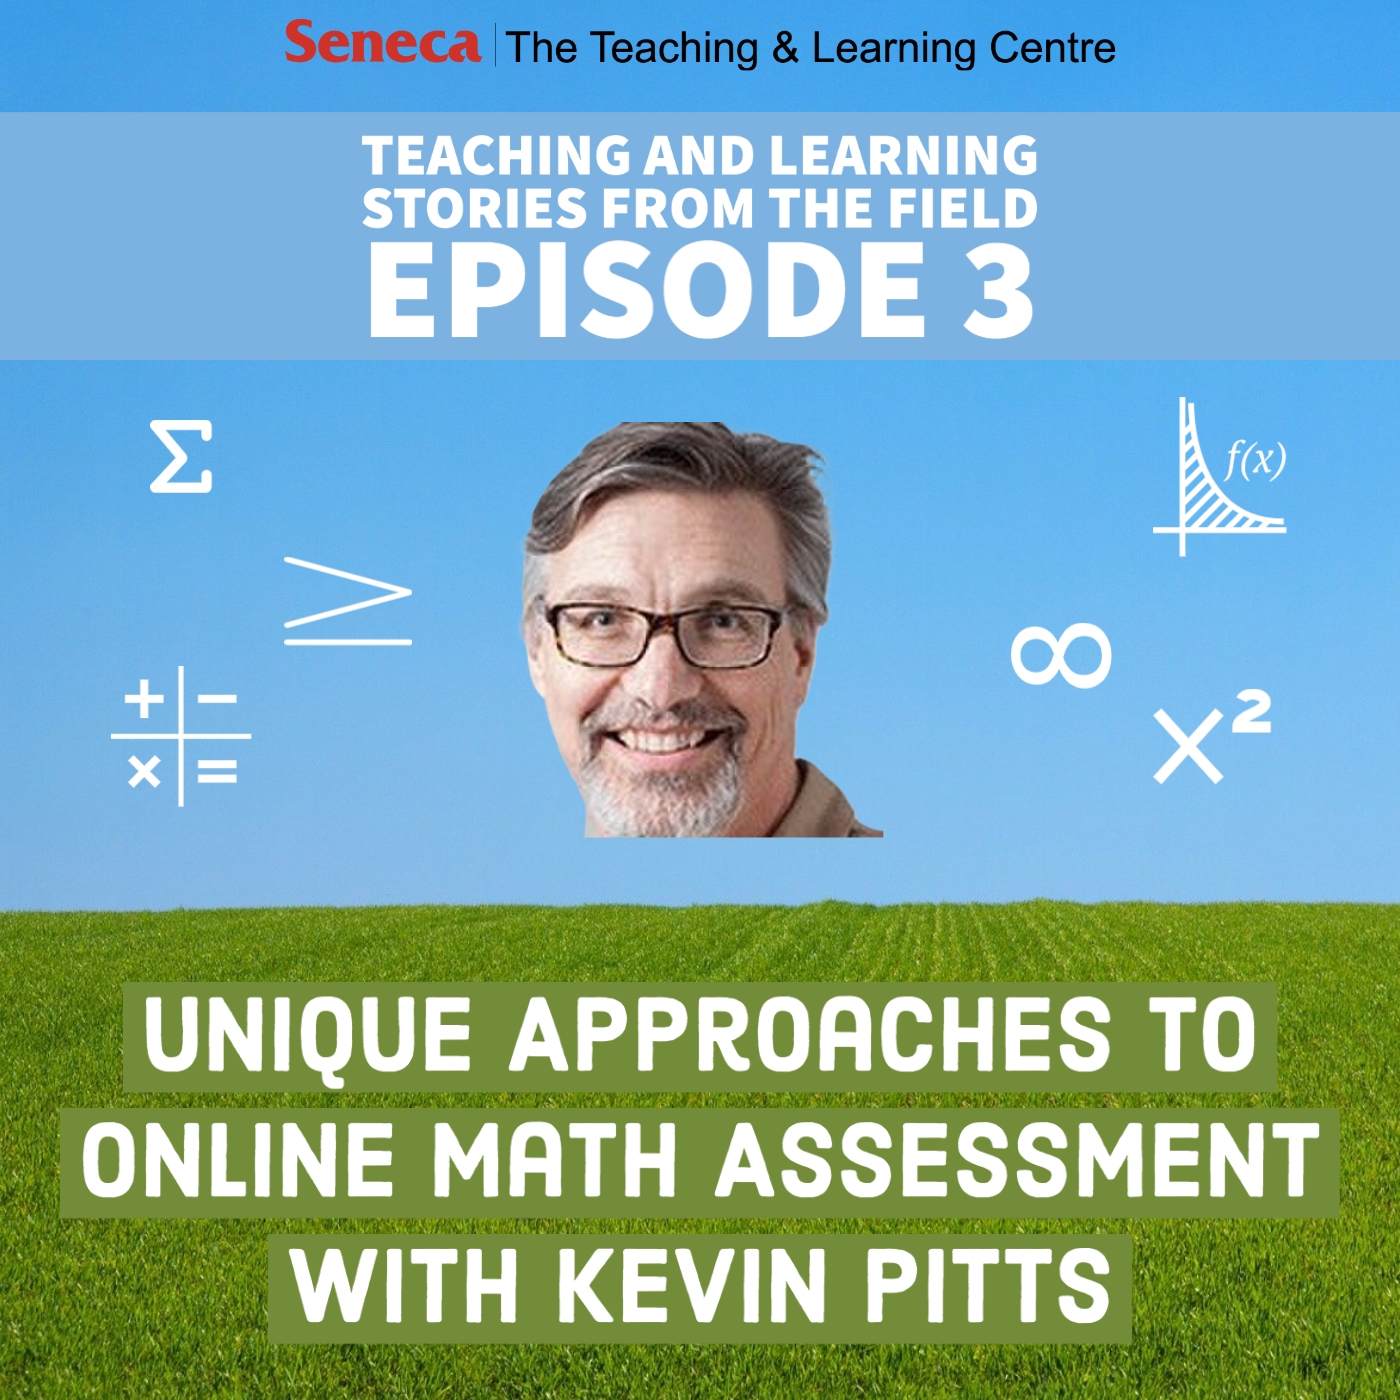 Episode 3 of the Teaching and Learning Stories podcast is called Unique Approaches to Online Math Assessment with Kevin Pitts